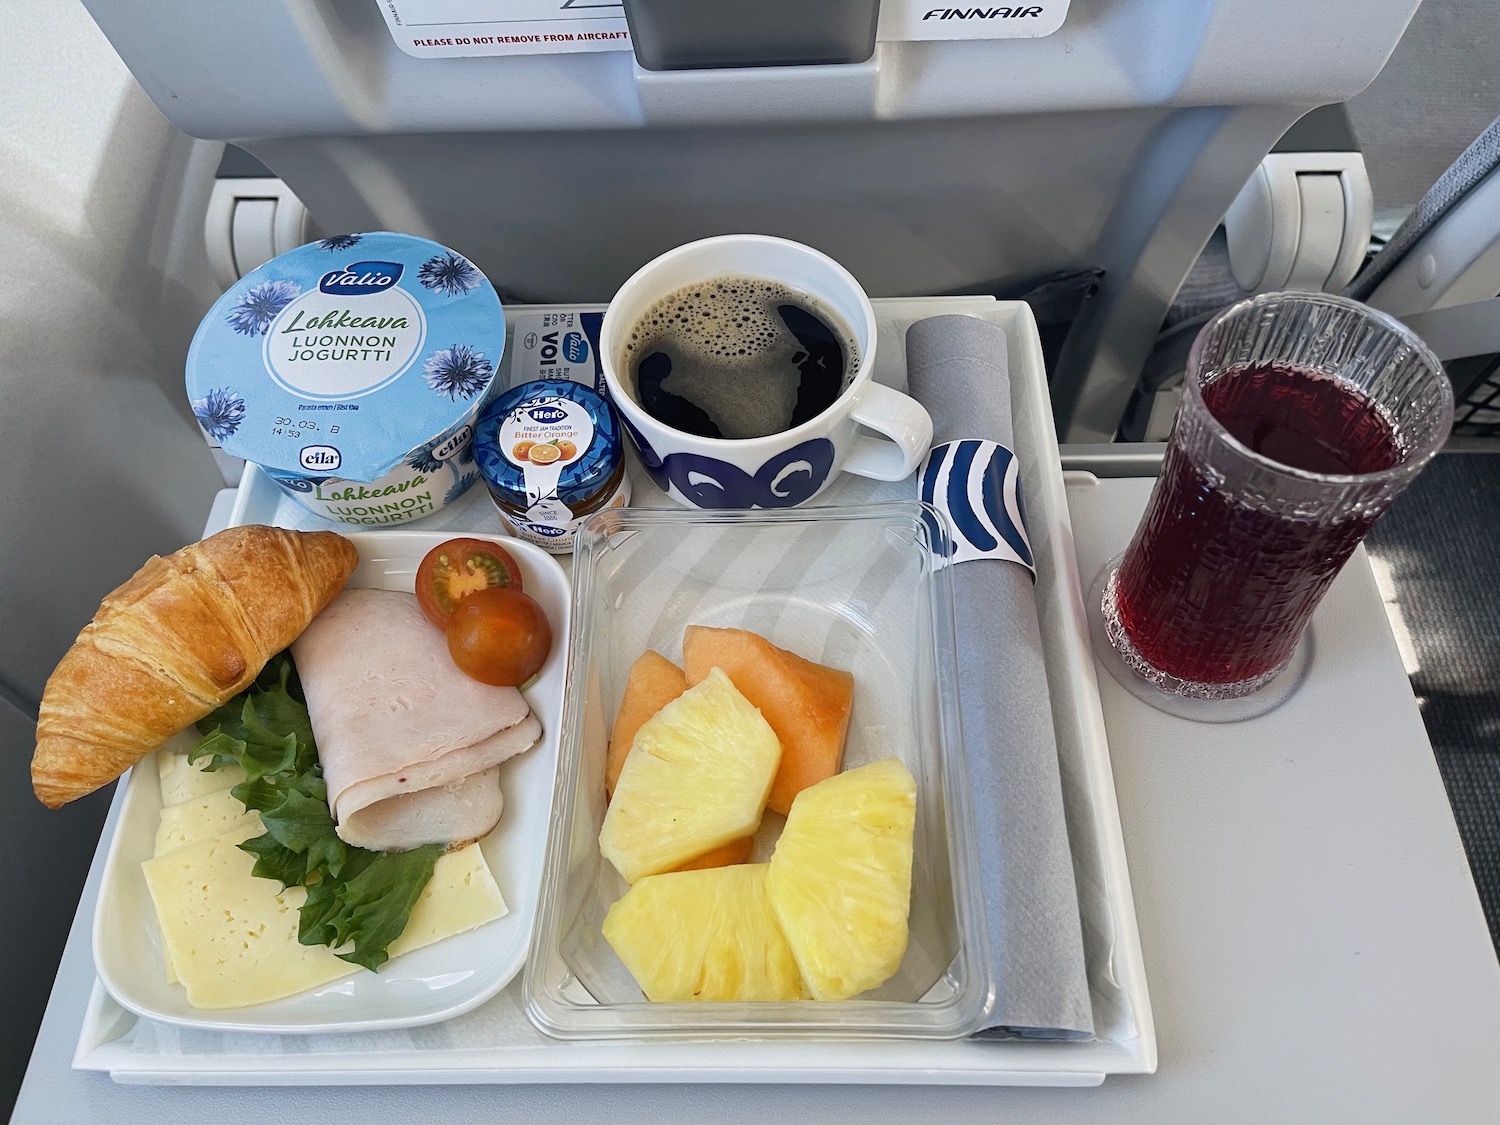 a tray of food and drink on a plane